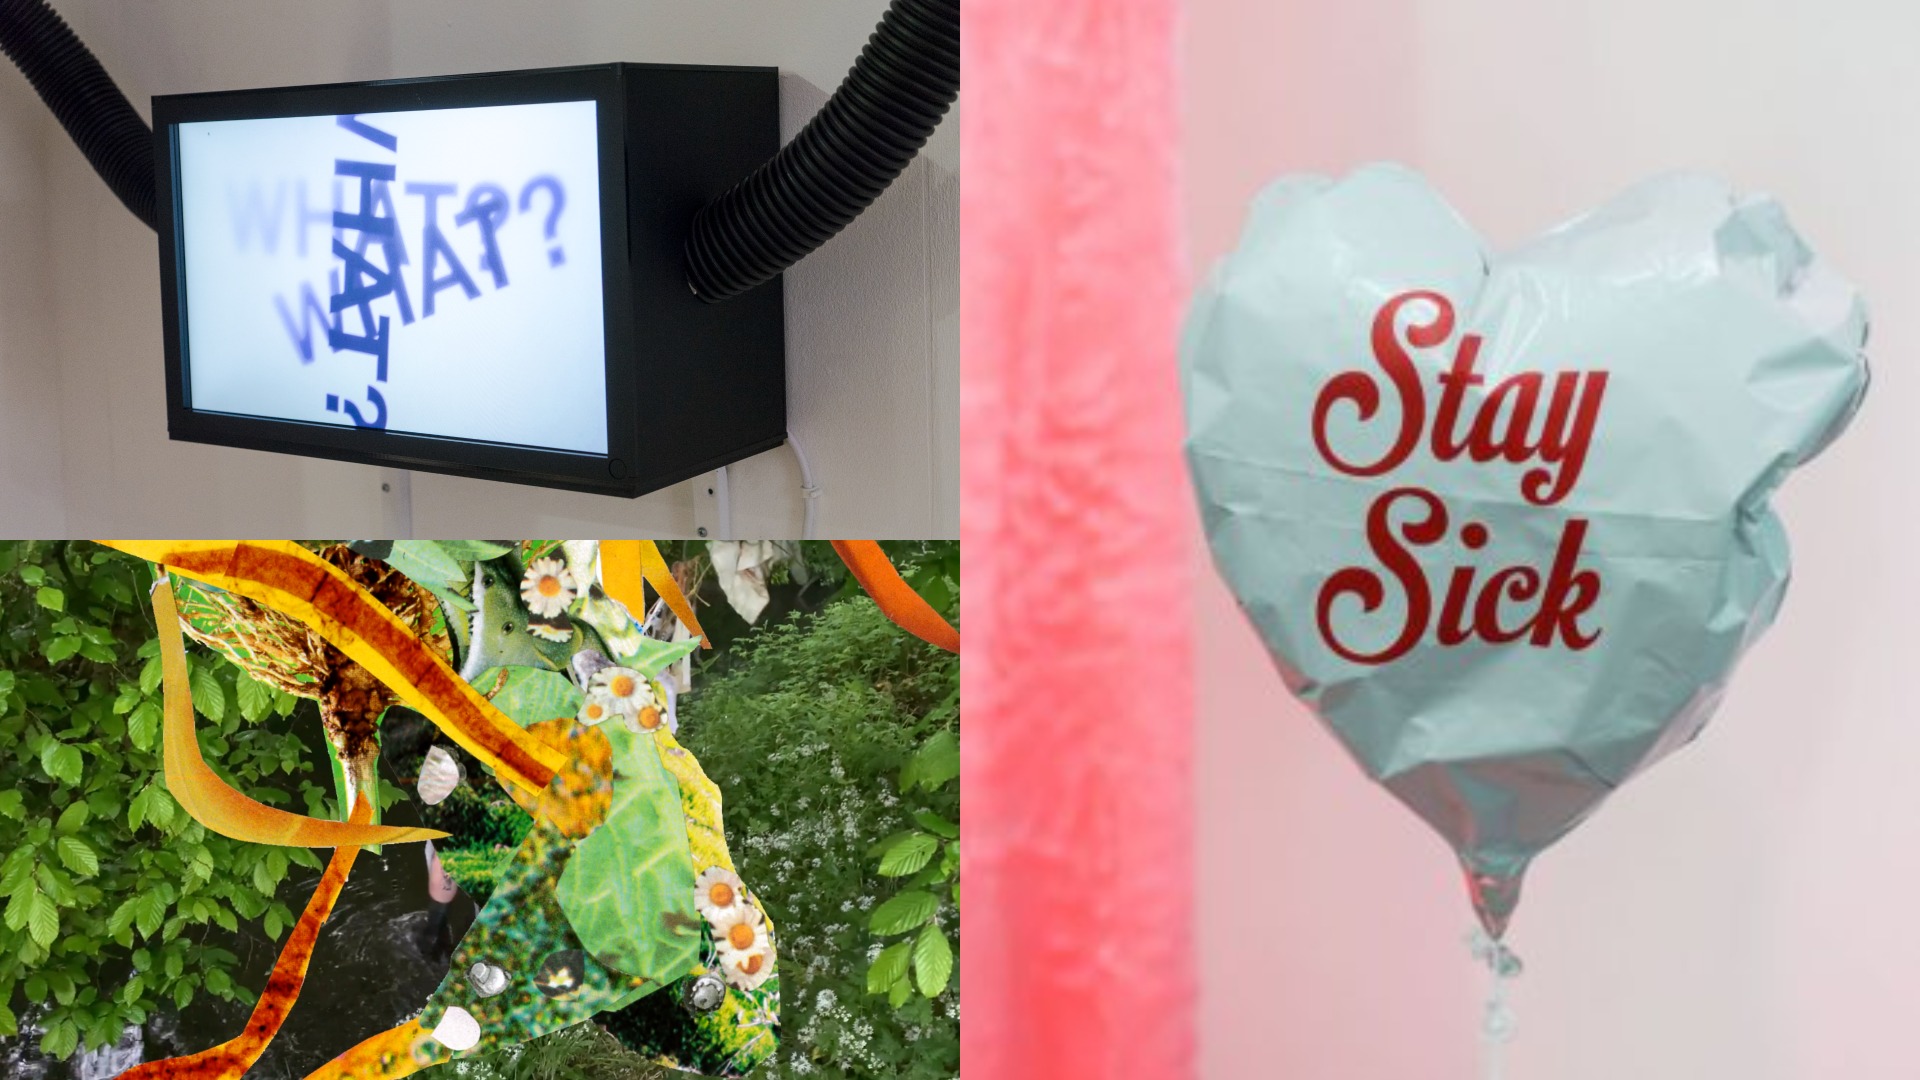 Three images in a composite – top left image: a black rectangular lightbox with a white screen has the word what with a question mark written 3 times on it, black pipes leave the box on the left and right sides. Top right image: a white heart shaped balloon has the words stay sick written in the middle. Bottom left image: a collage of green leaves, white daisies with yellow centres, and stripes of yellow and red streak across the image.